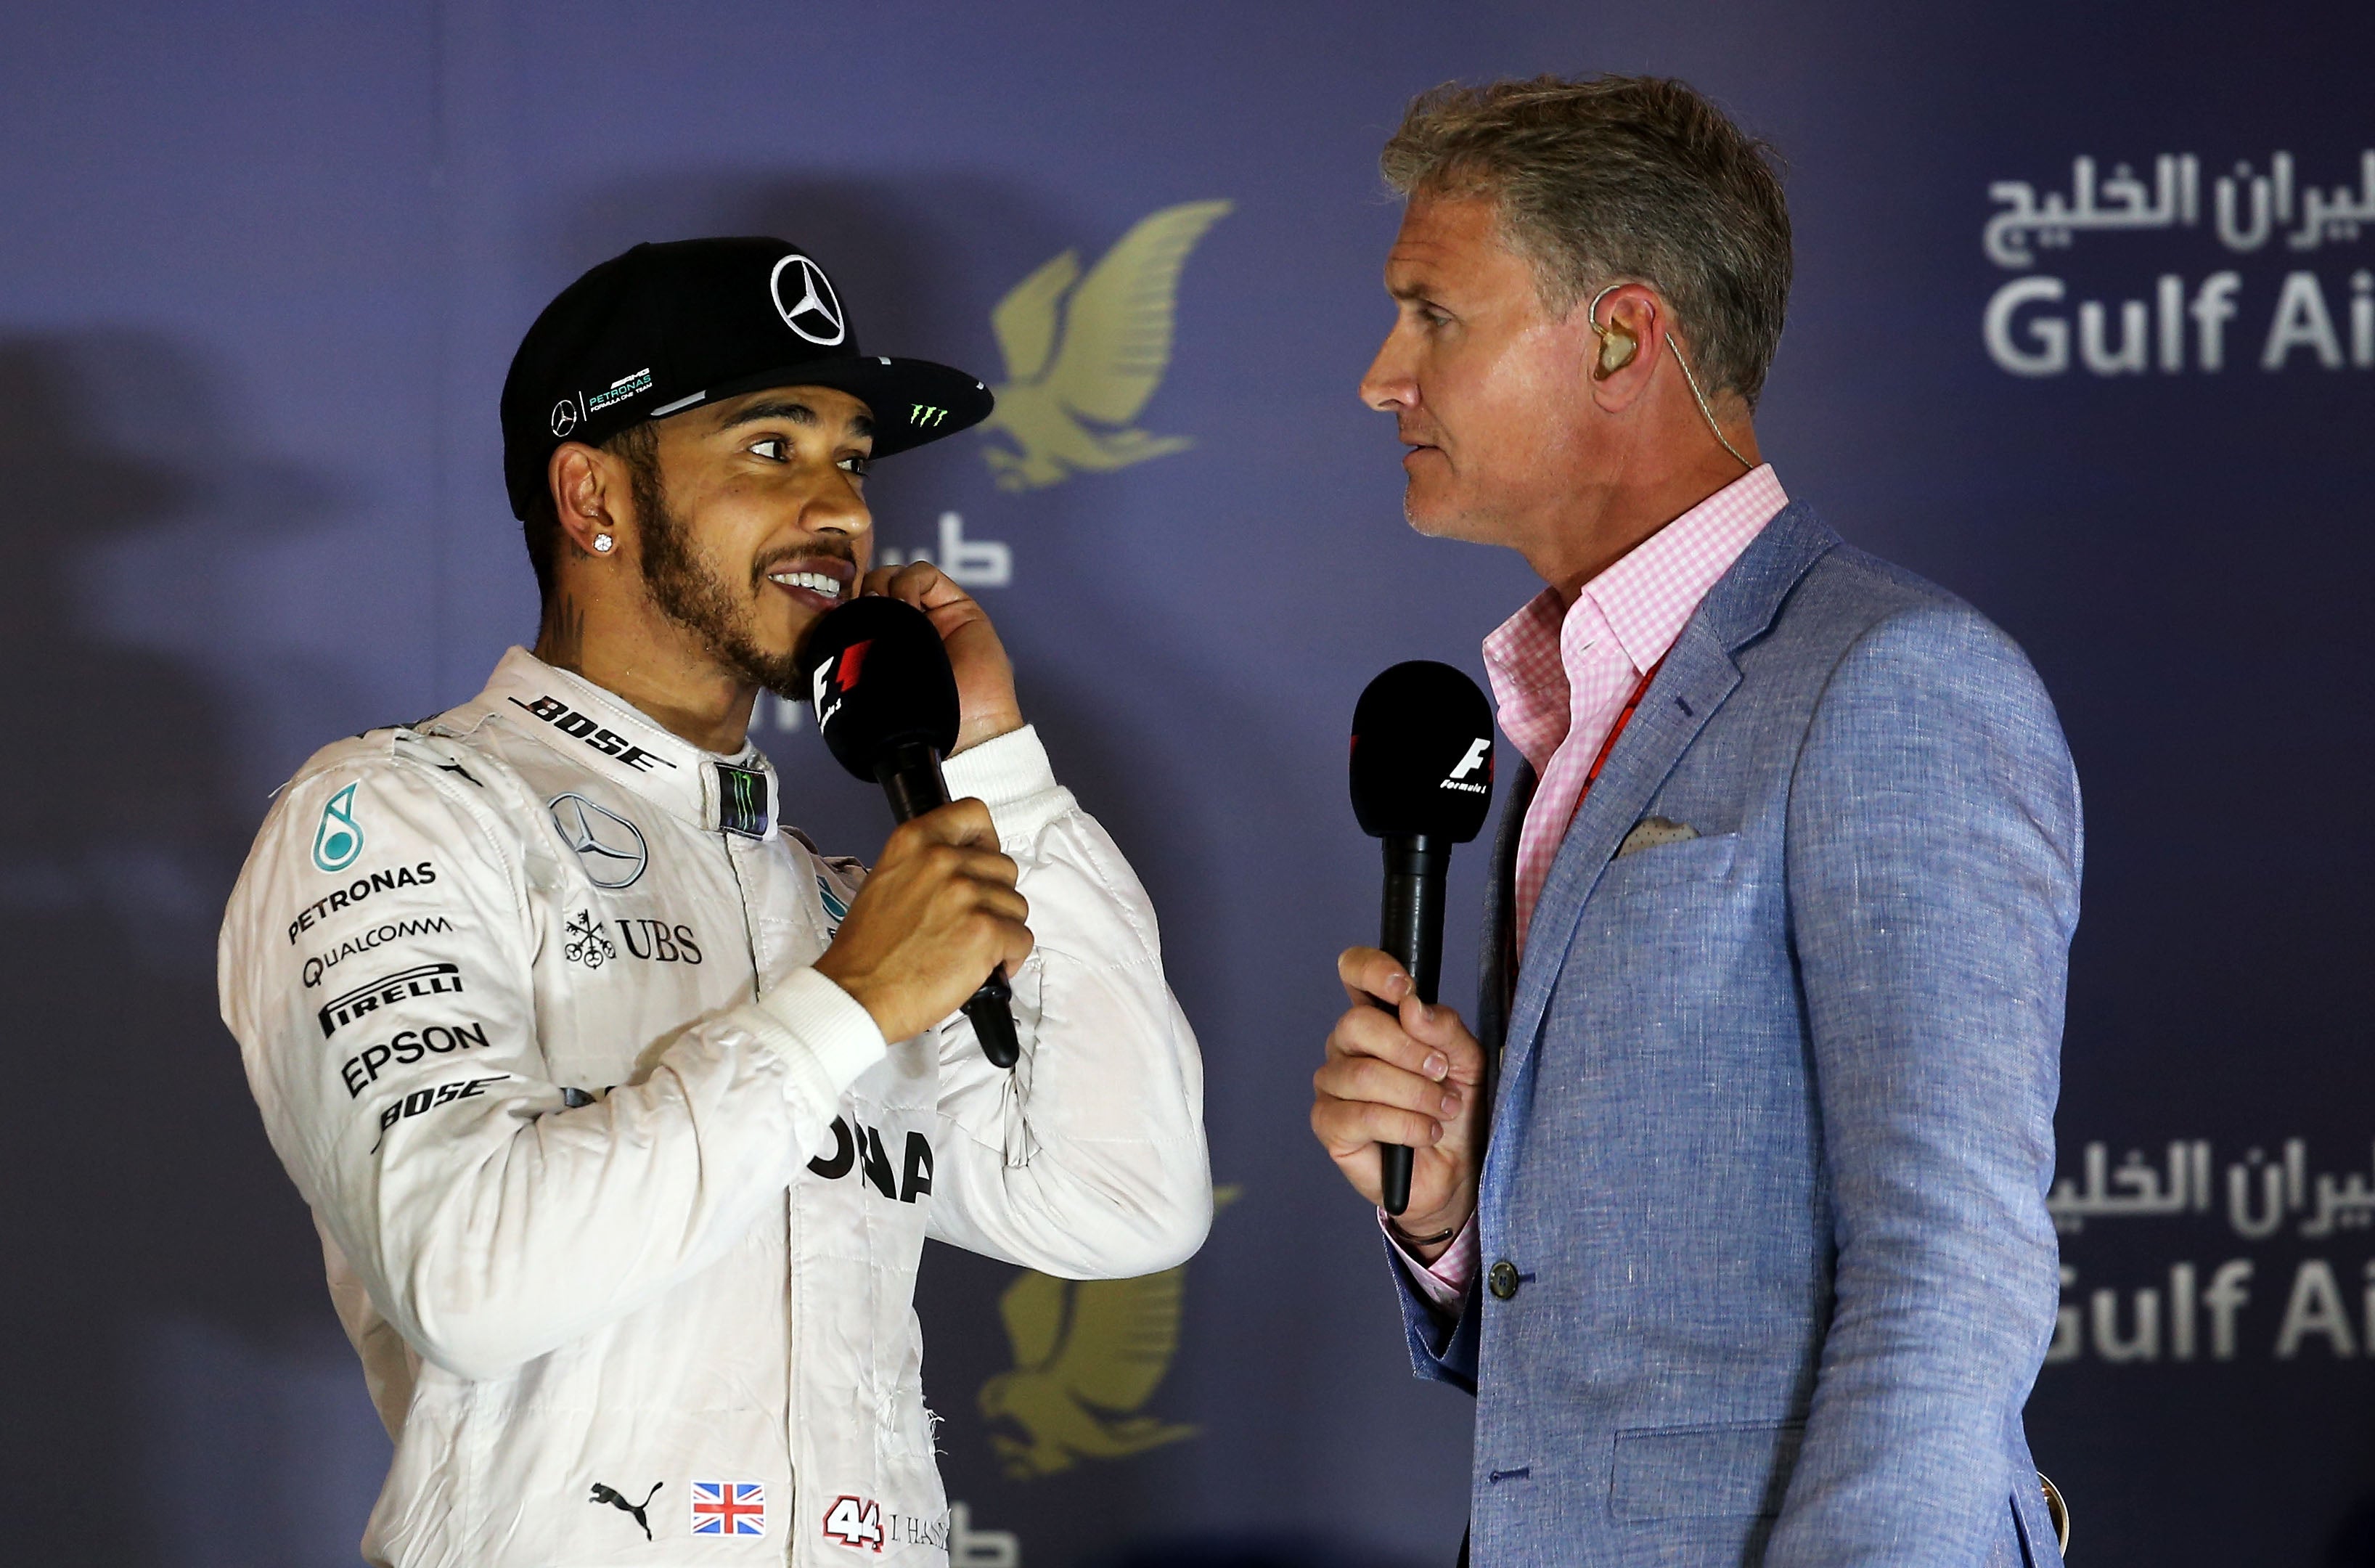 Lewis Hamilton speaks with David Coulthard in 2016